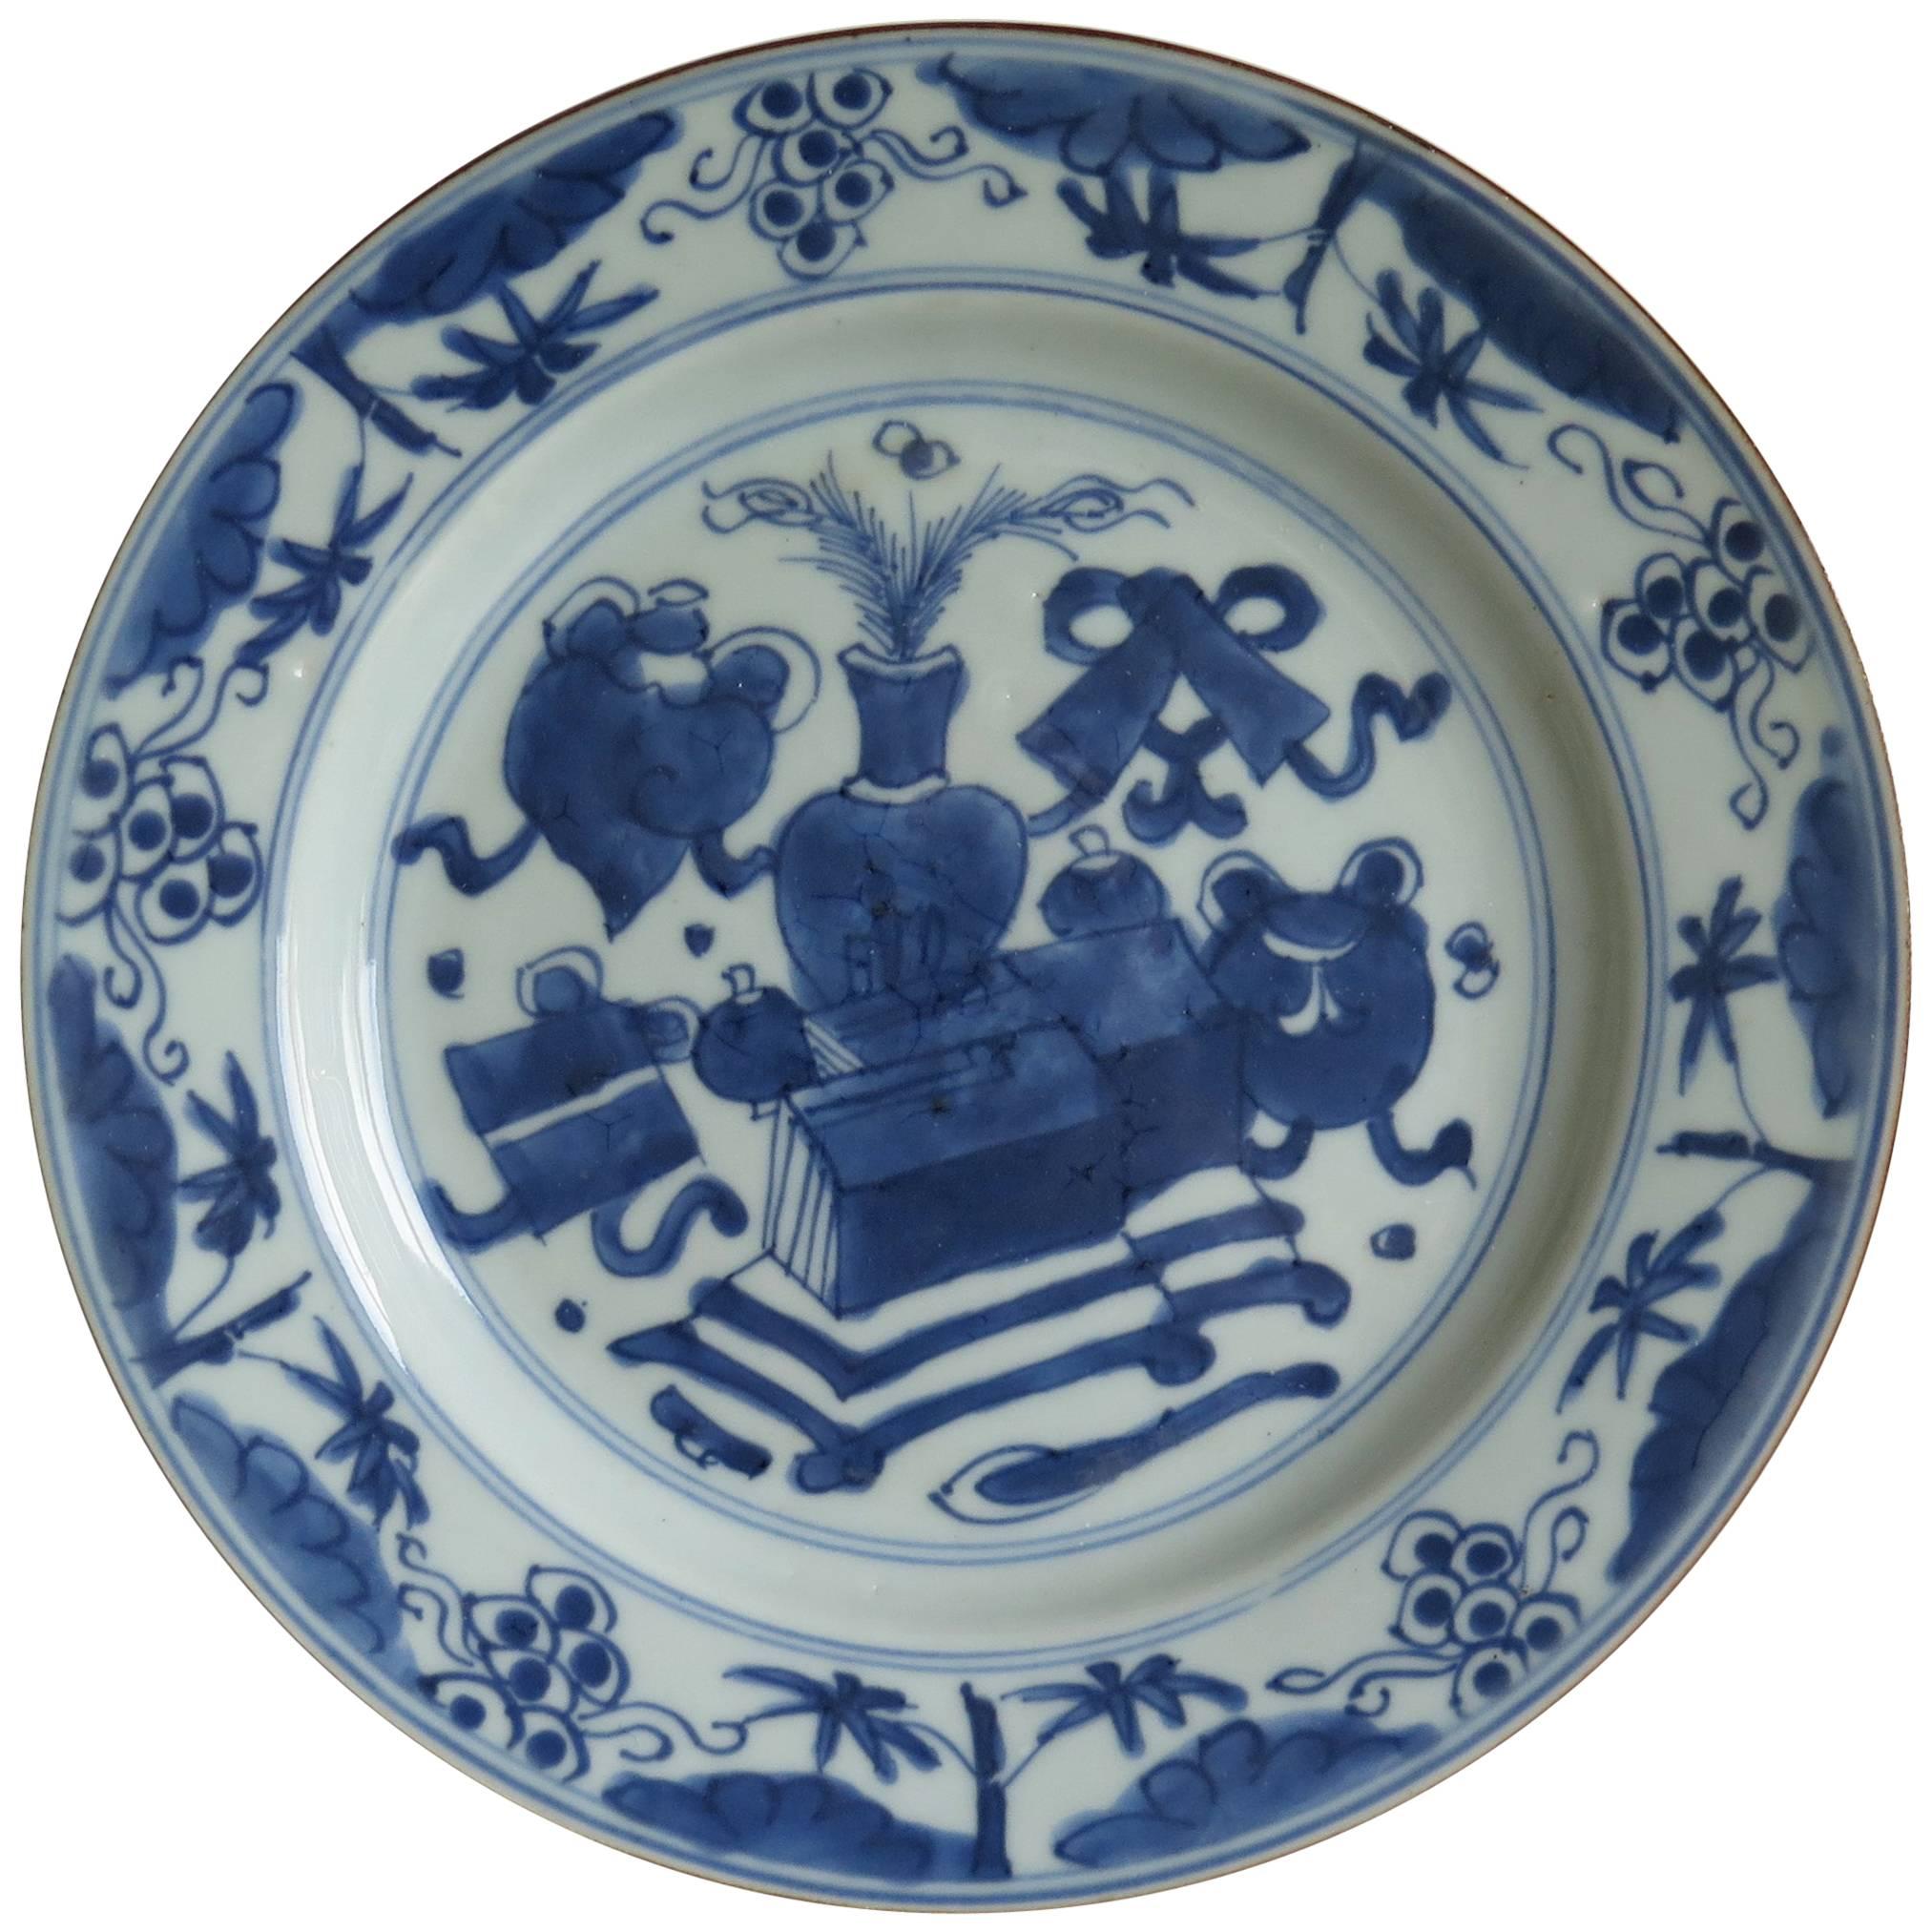 Early 18th Century, Chinese Porcelain Plate, Vase and Symbols, Qing, circa 1735